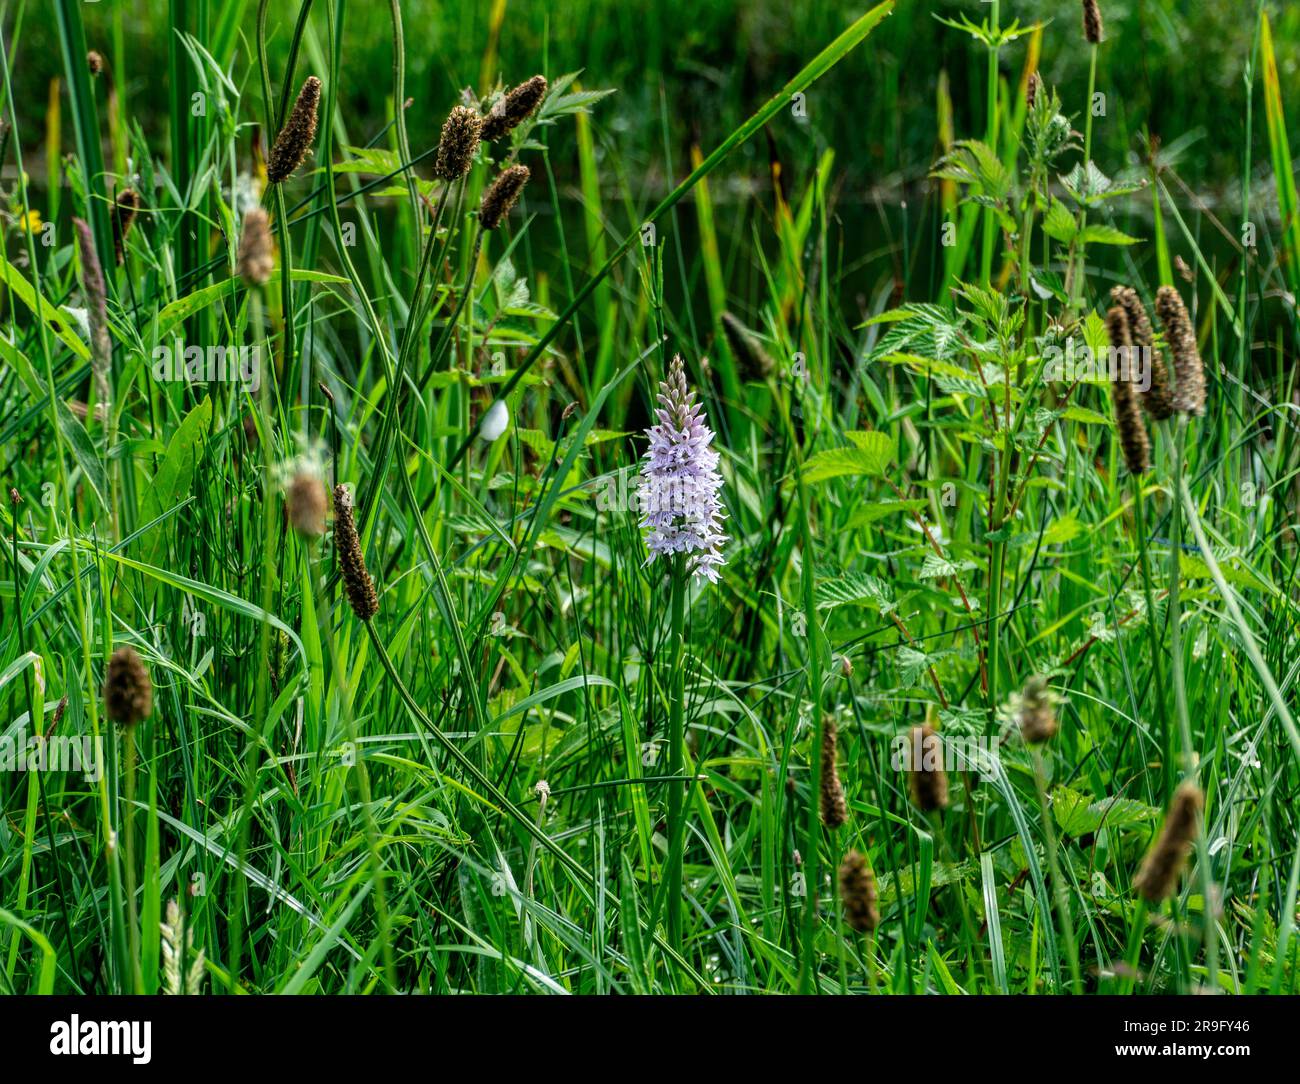 A moorland spotted orchid, (Dactylorhiza maculata) growing along the banks of the Royal Canal near Cloondara, County Longford, Ireland. Stock Photo